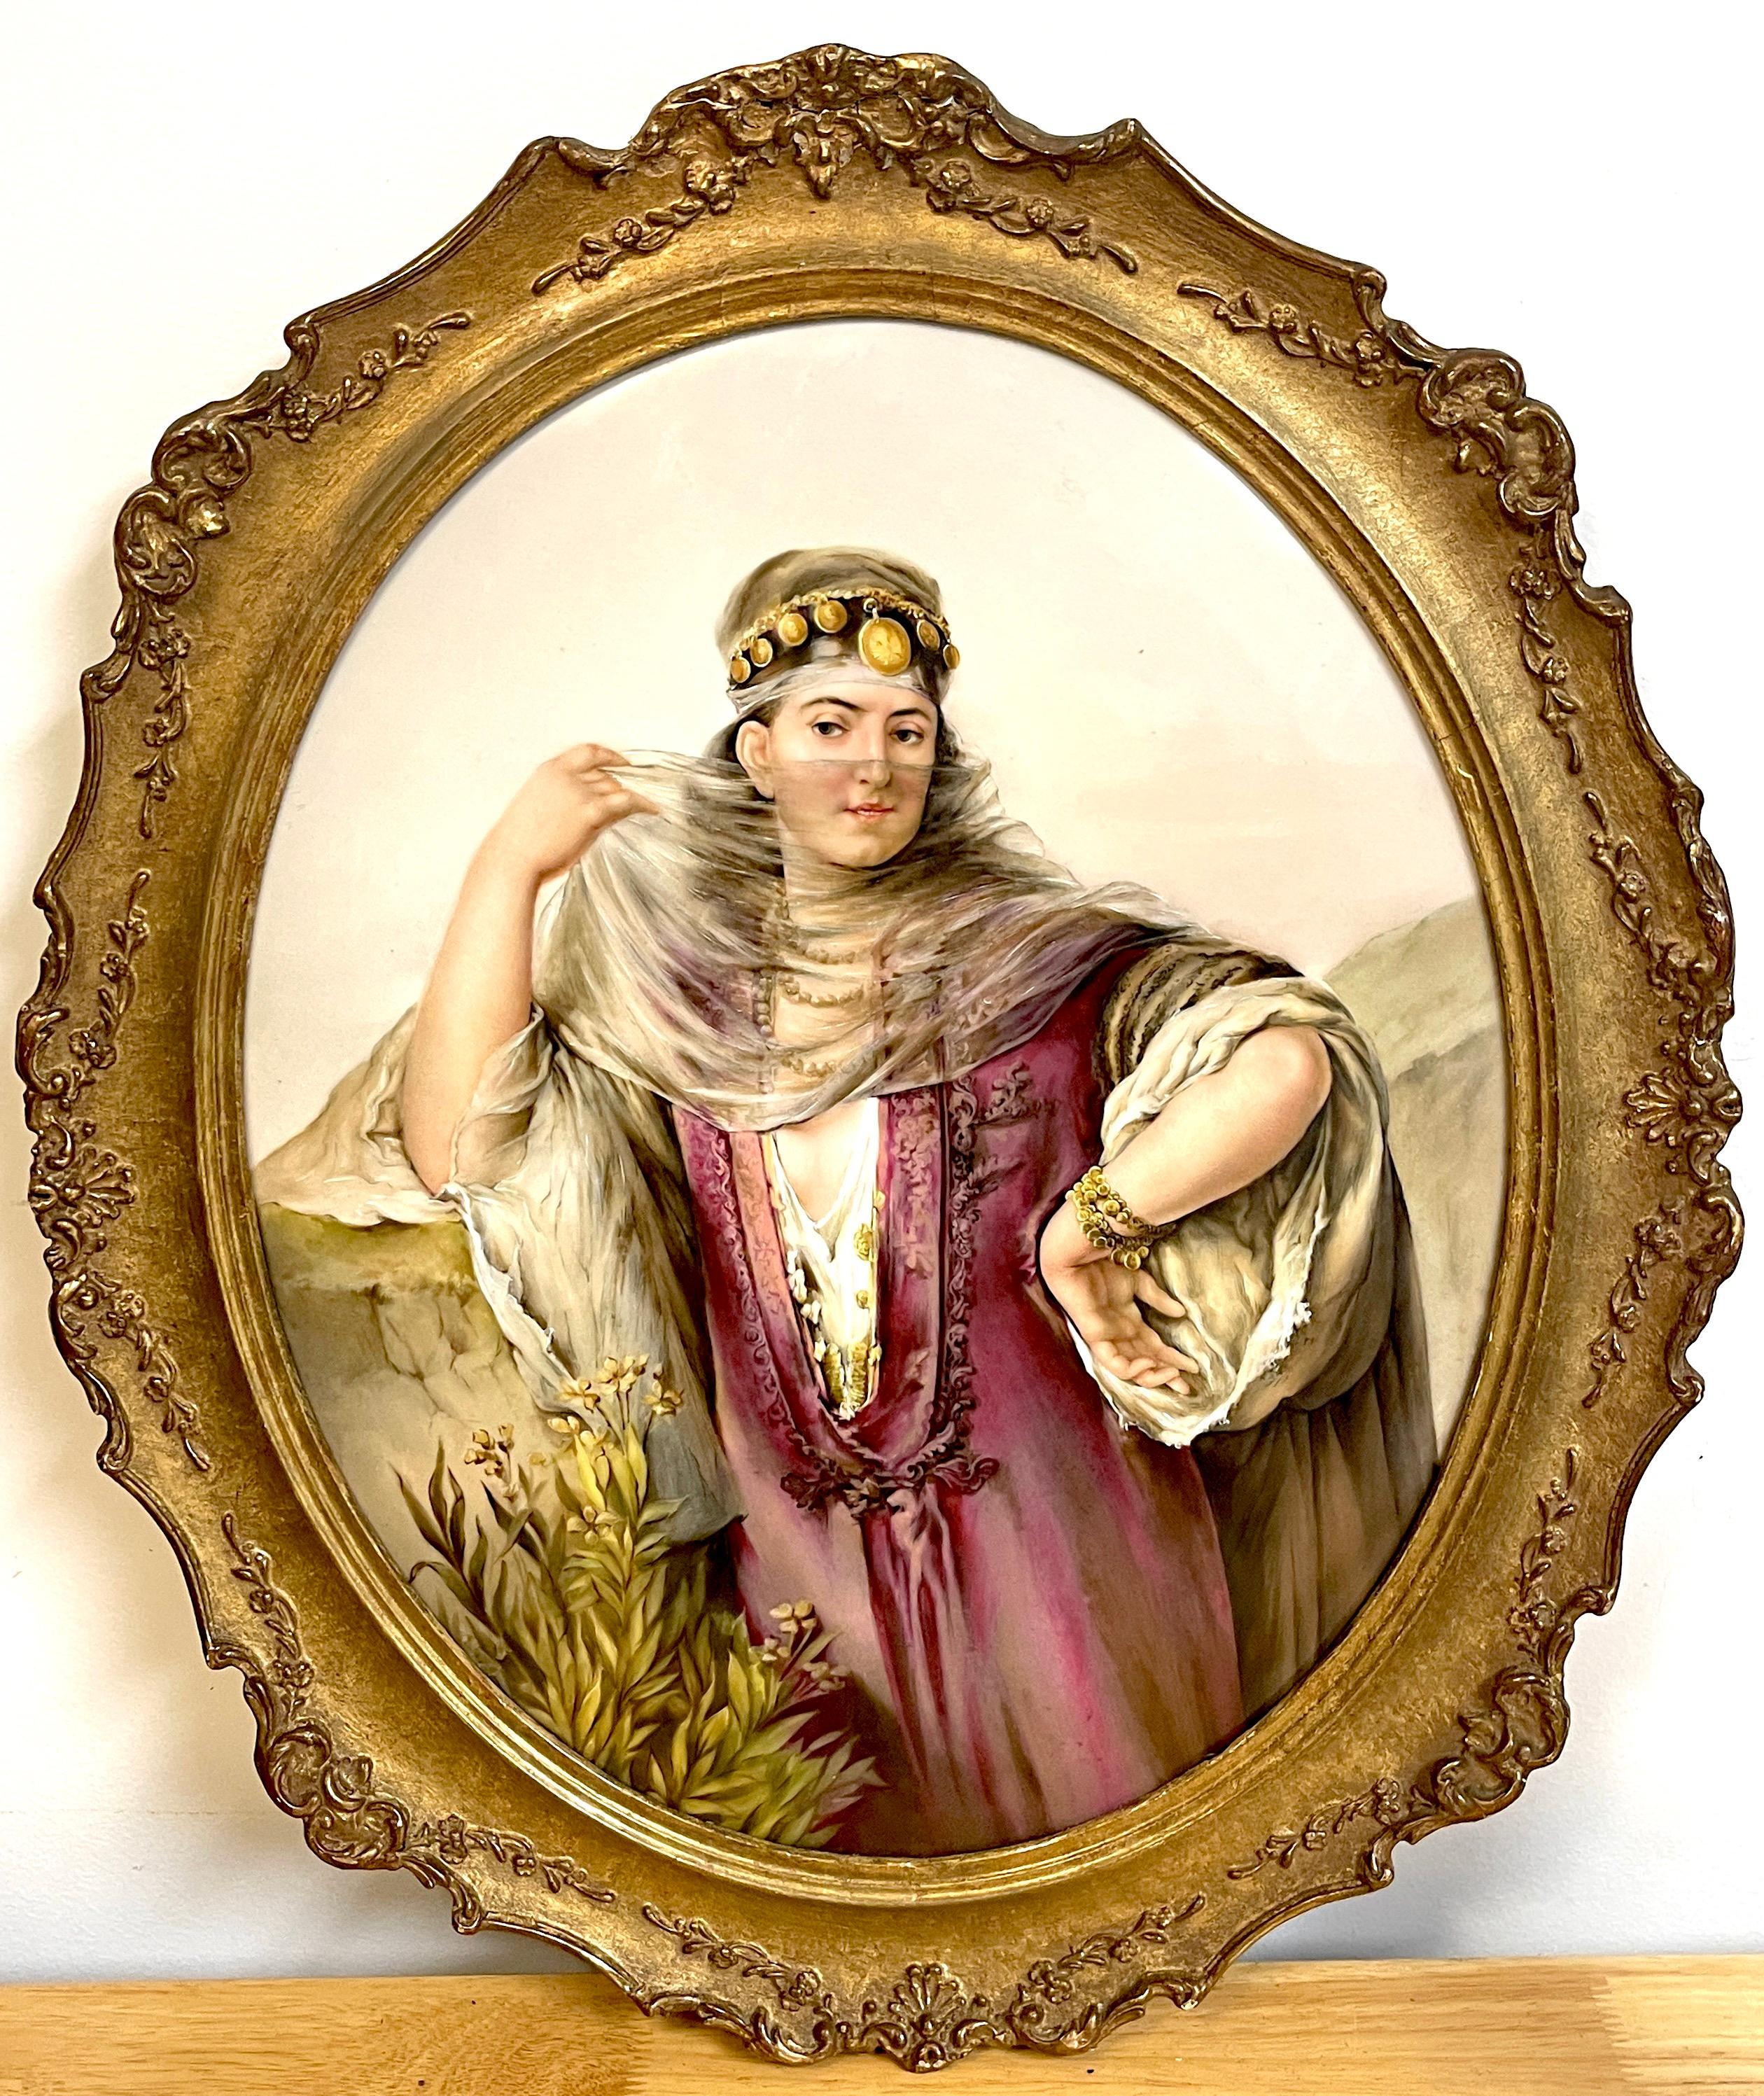 Large oval Berlin (K.P.M.) Porcelain plaque of a harem dancer
Exceptional painting of a veiled exotically dressed and jeweled dancer, in landscape. 
Impressed K.P.M. and scepter mark to reverse, with other factory marks.
Plaque: 17 H x 13 1/2 W